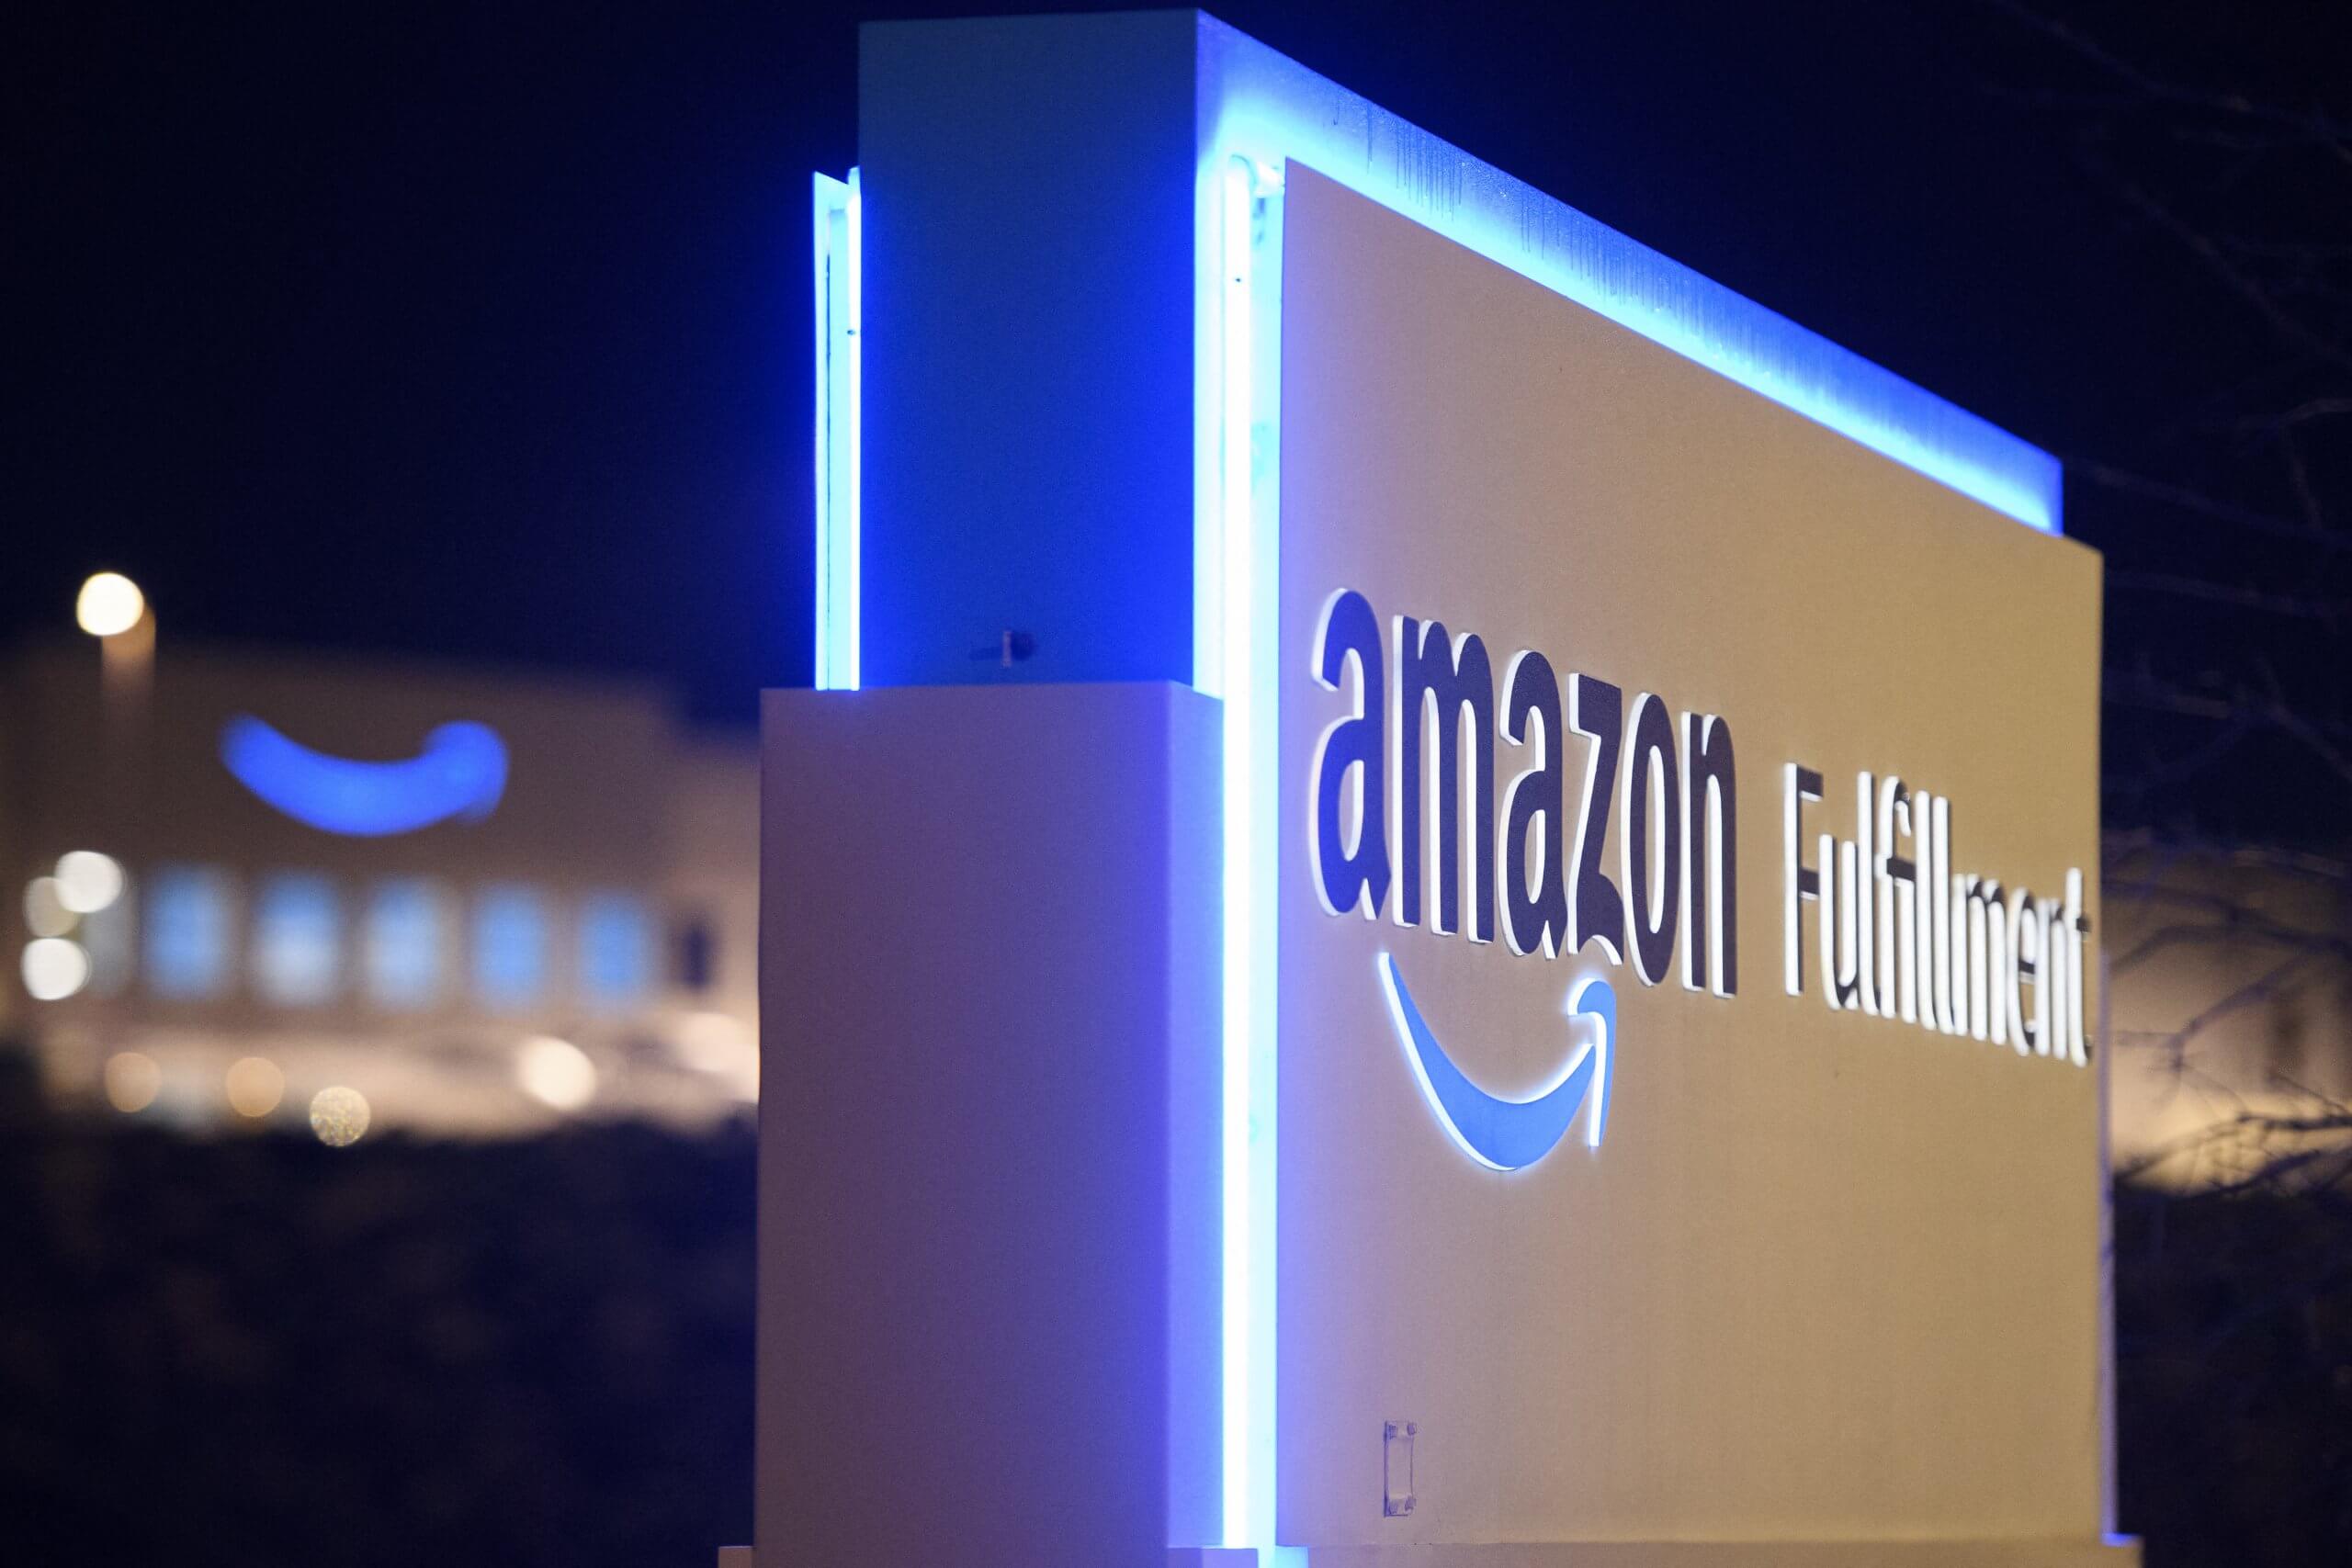 Lawmakers asked the Dept of Justice @USDOJ_Intl to launch an investigation after claims that Amazon blocked inquiry attempts "after Amazon was caught in a lie and repeated misrepresentations"